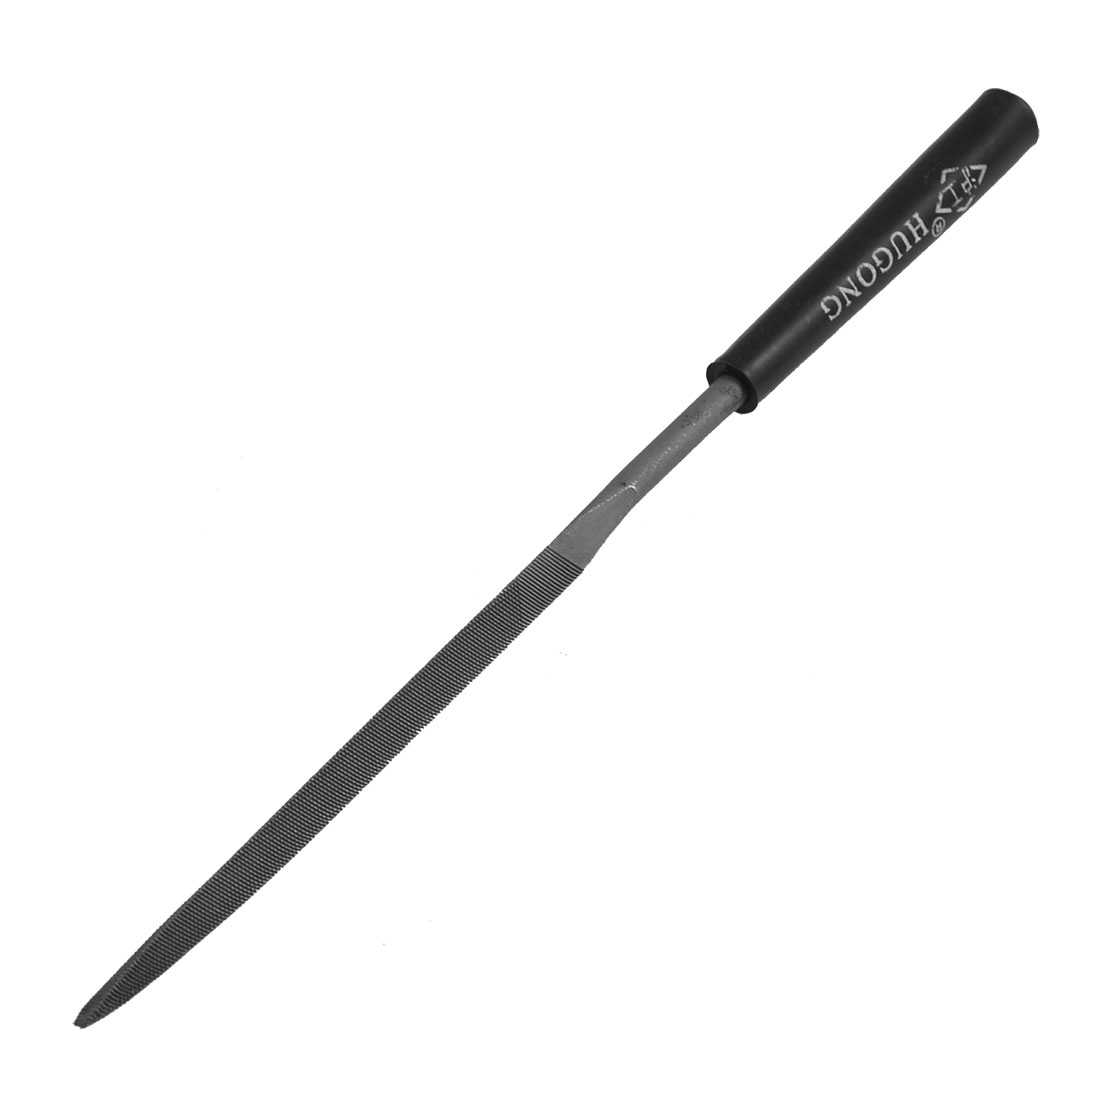 Black Handle 4mm x 165mm Woodworking Triangle Needle Files Tool